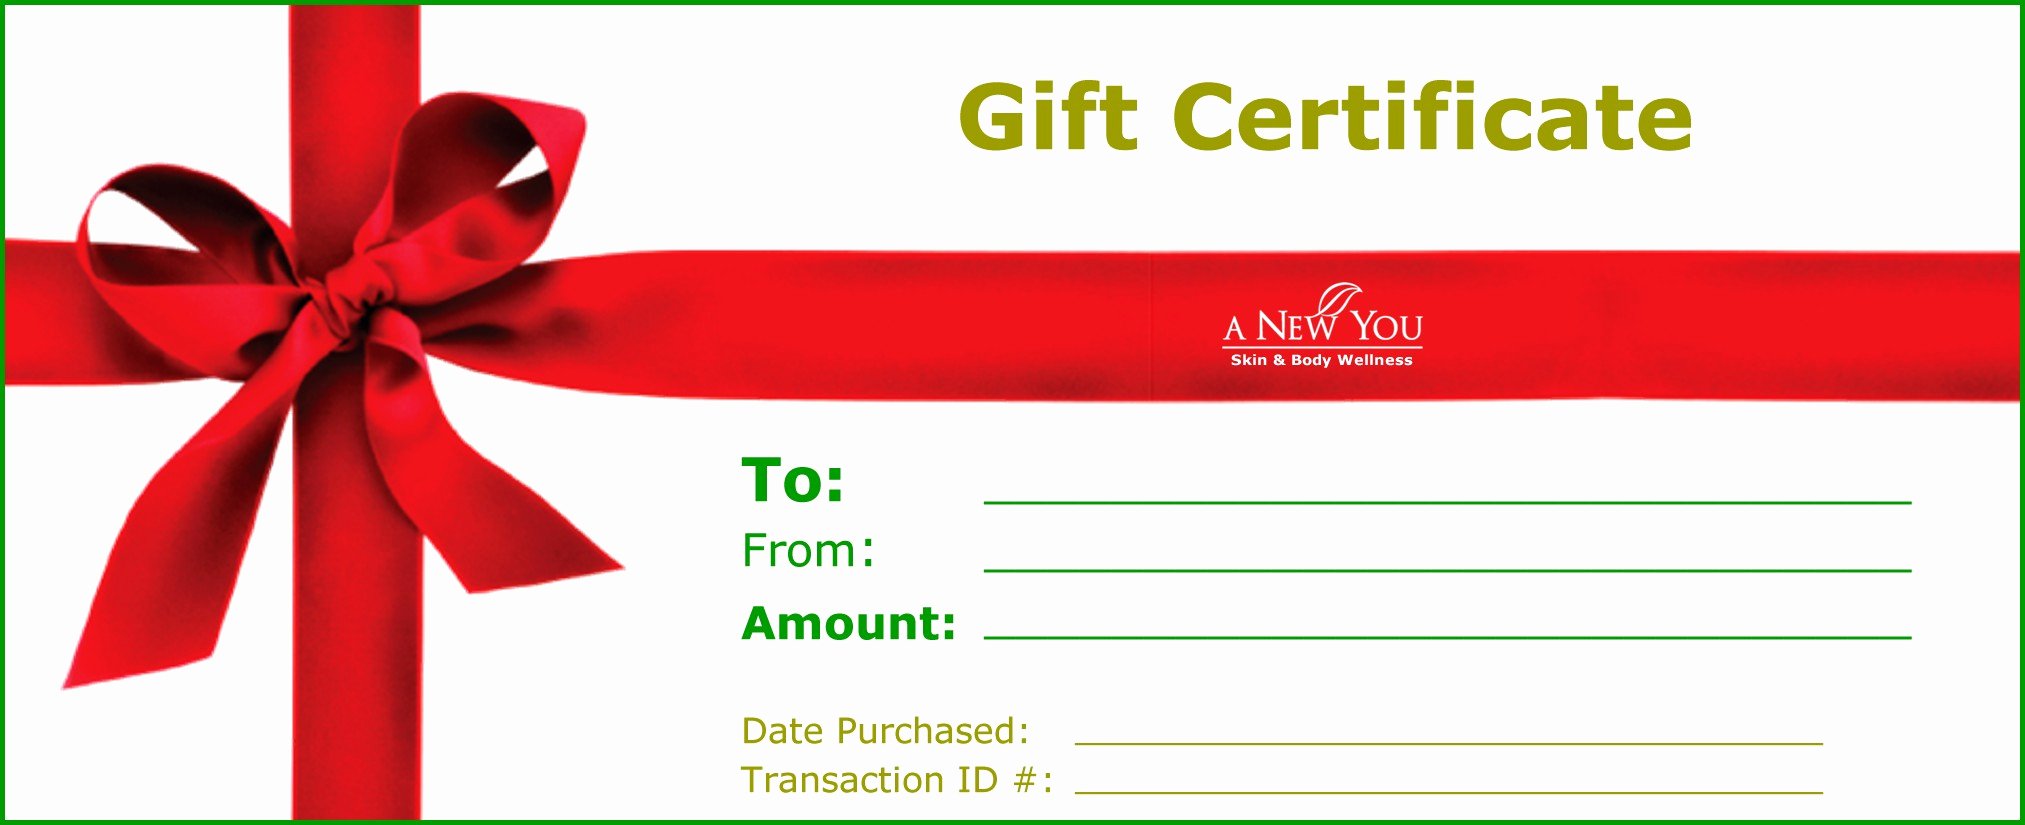 Free Holiday Gift Certificate Template Lovely 18 Gift Certificate Templates Excel Pdf formats